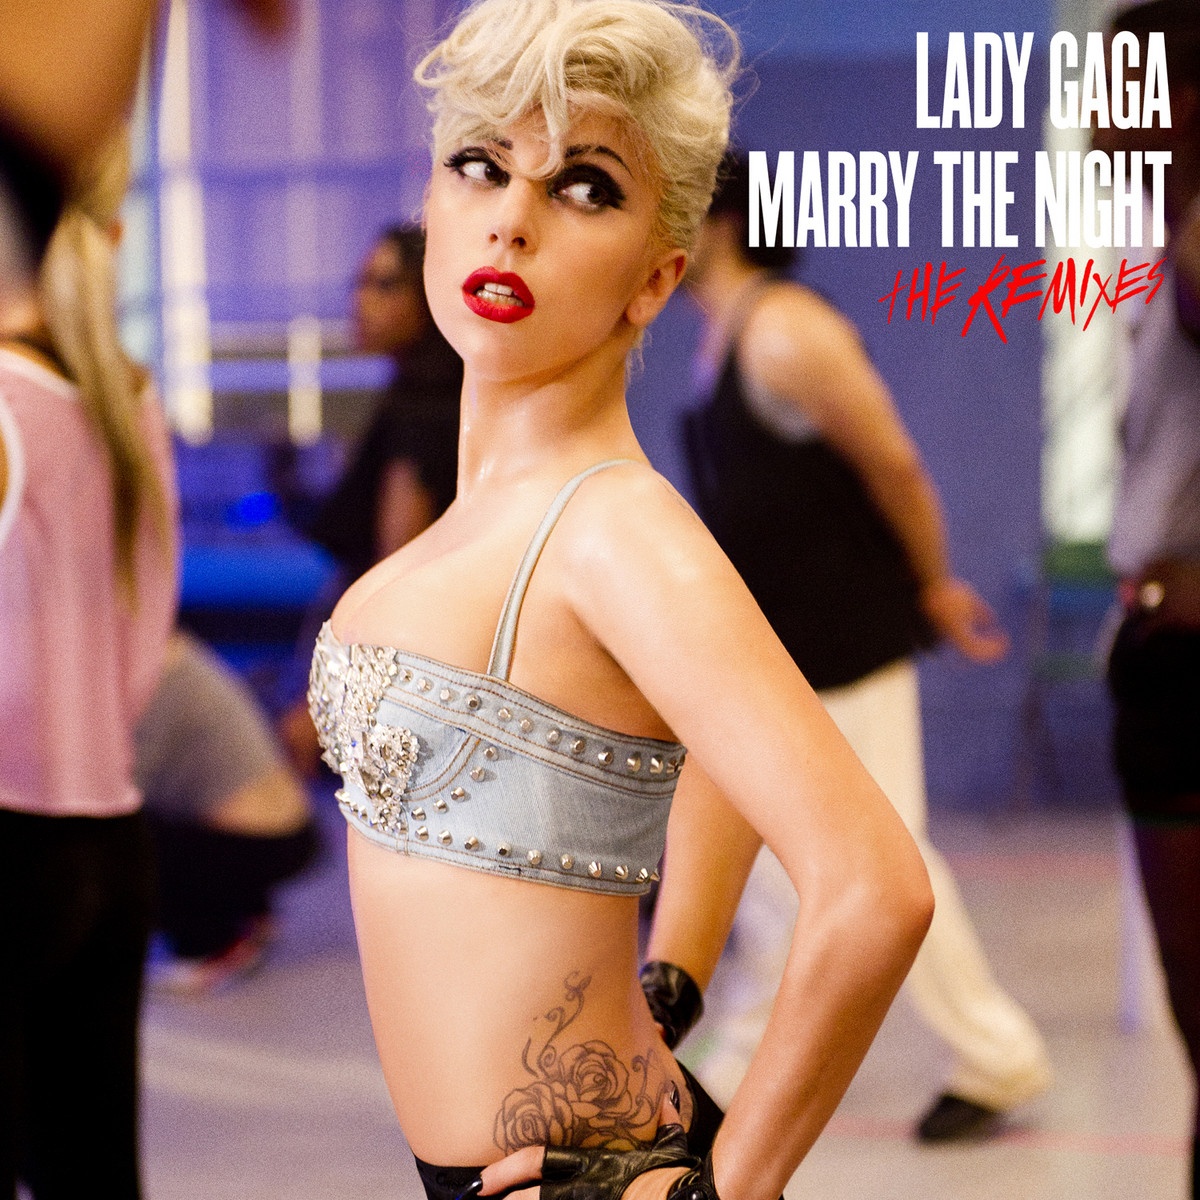 Marry The Night - R3hab Remix